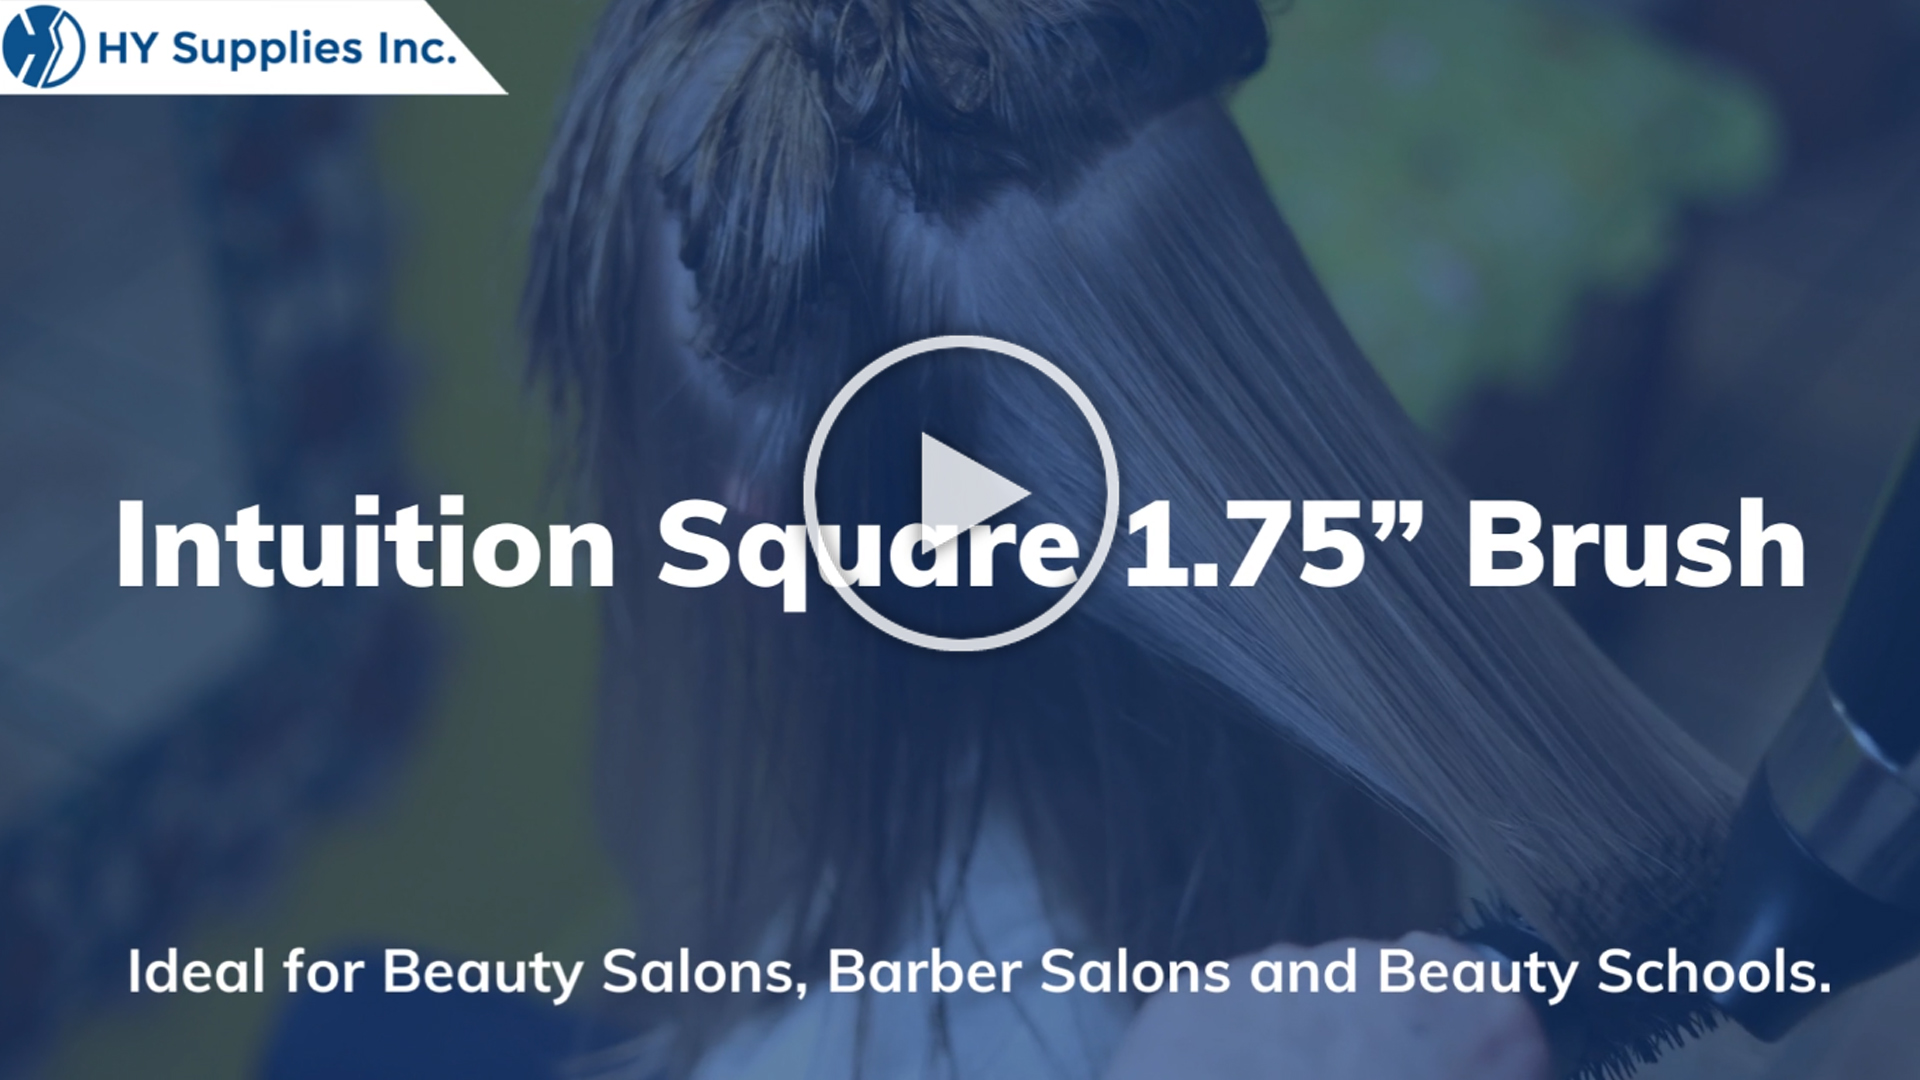 Intuition Square 1.75" Brush